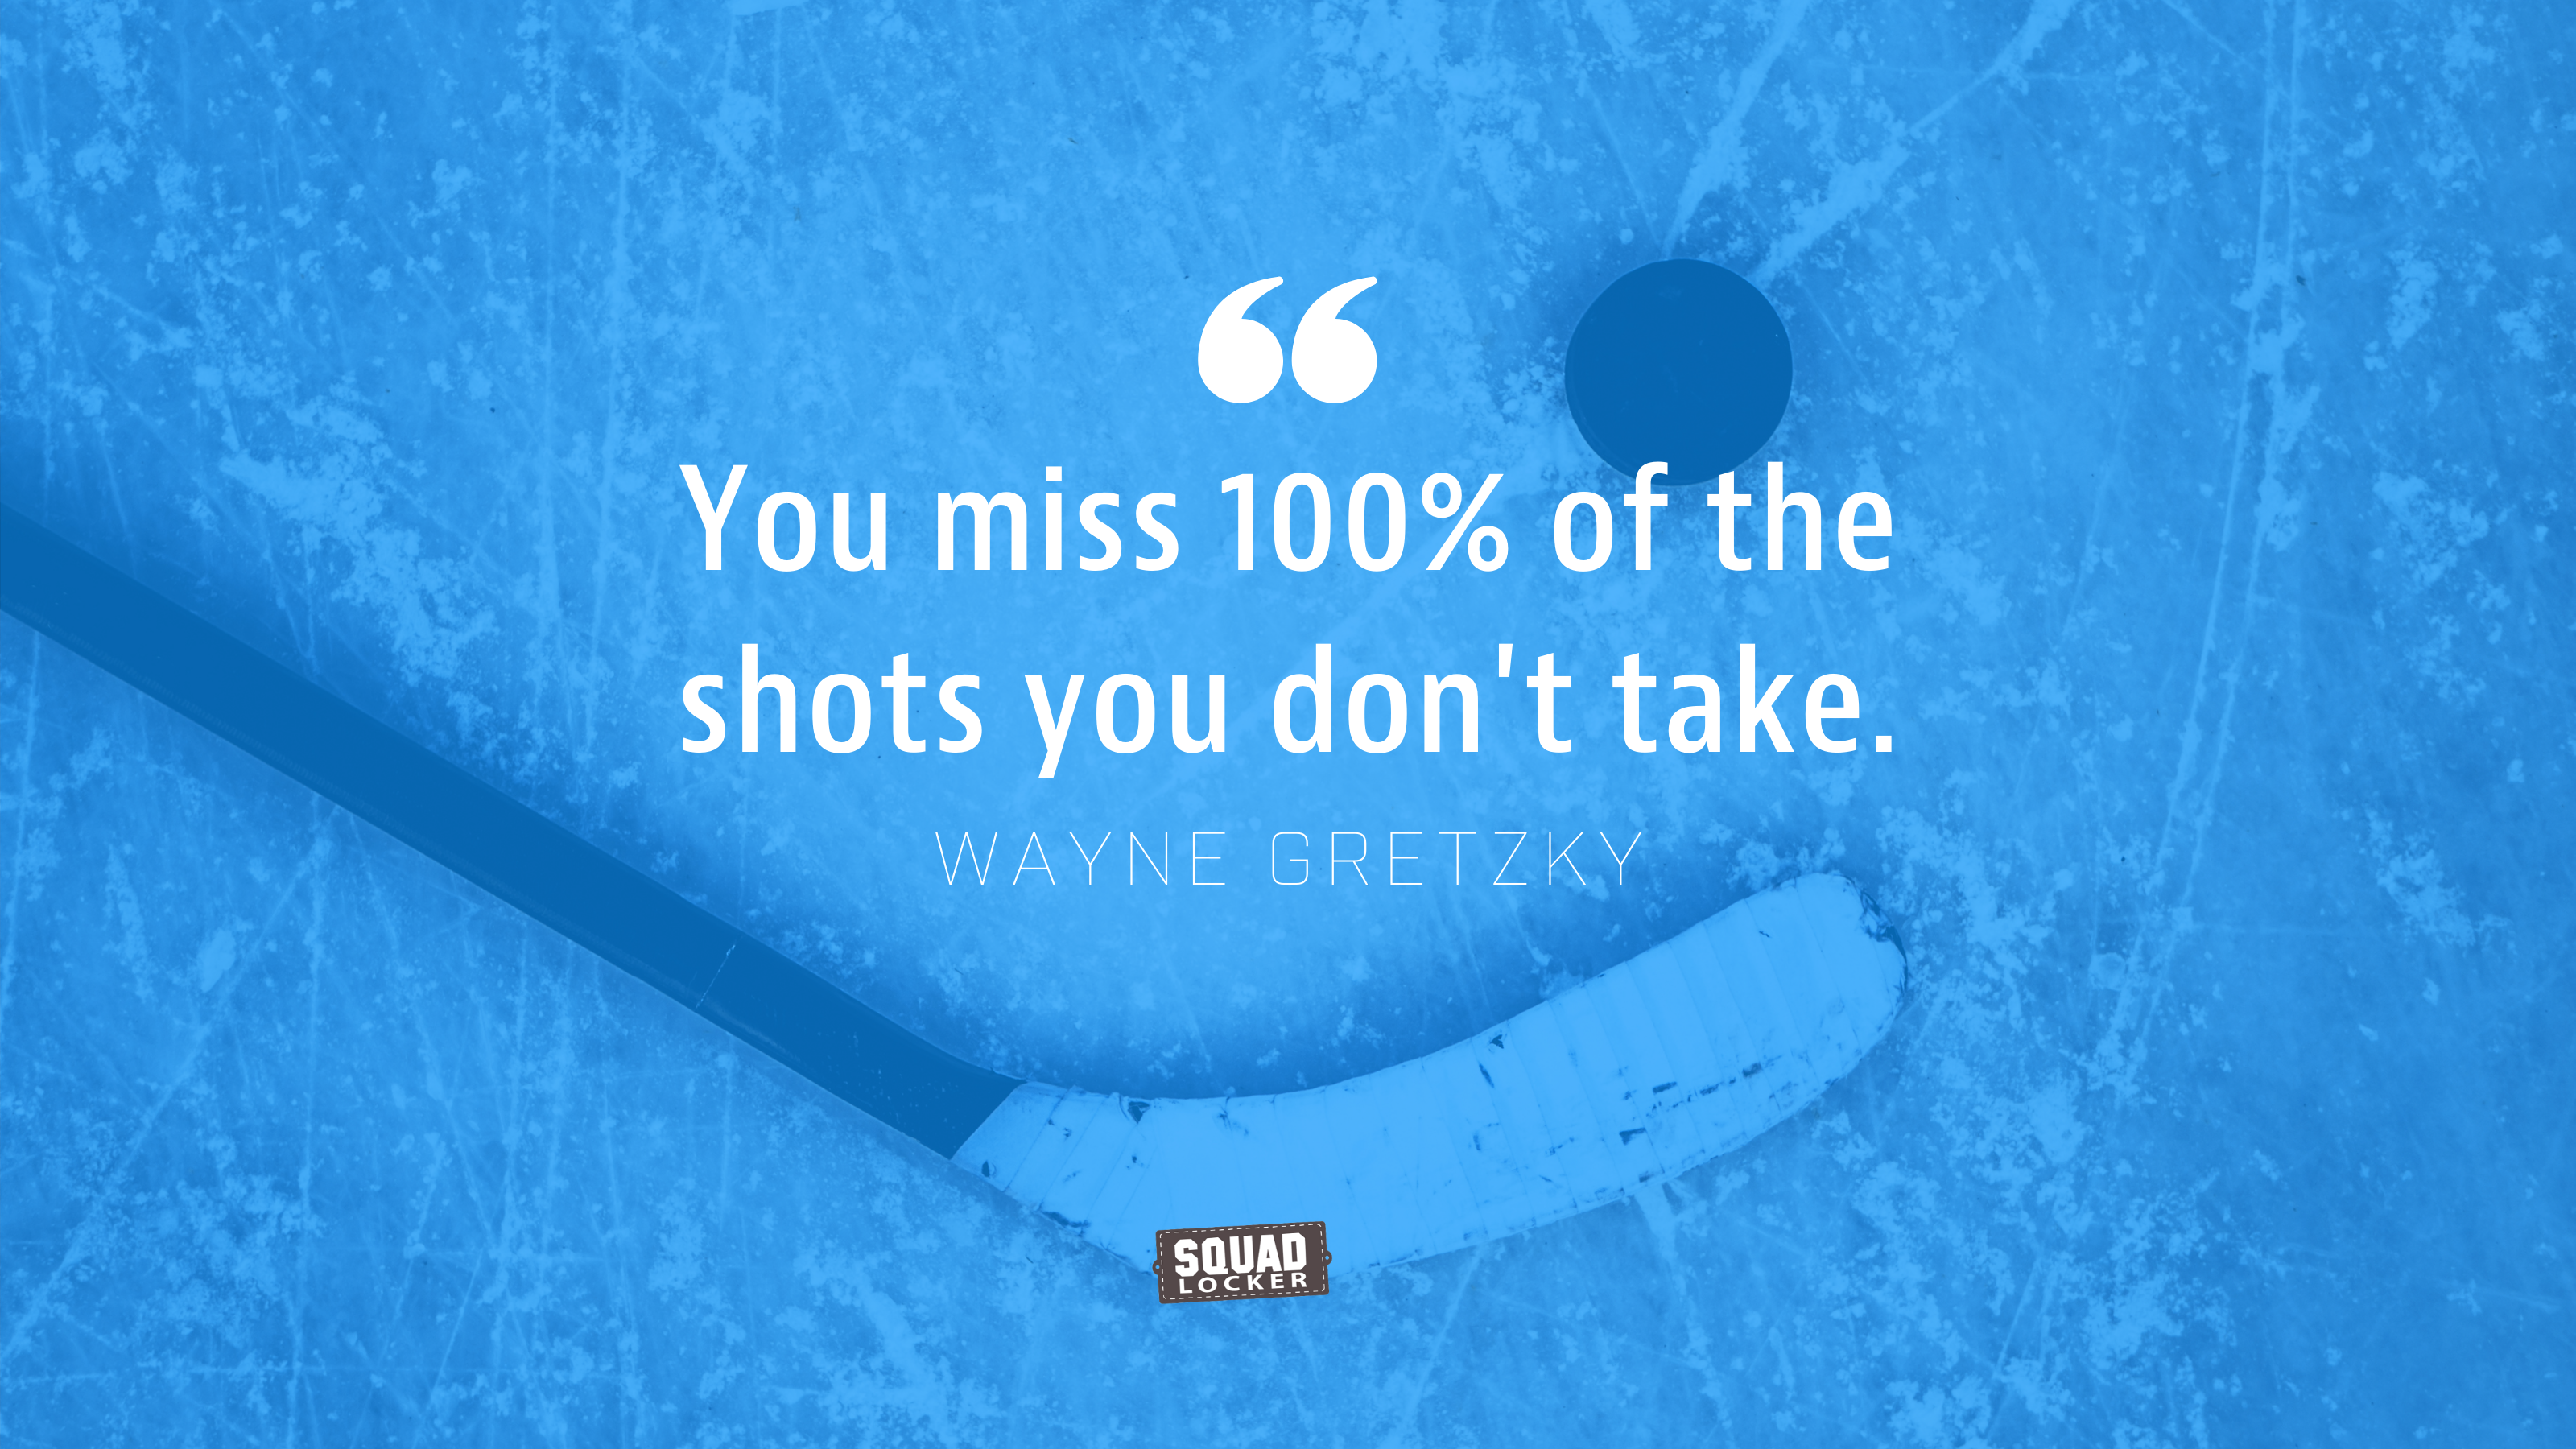 sports motivational quotes